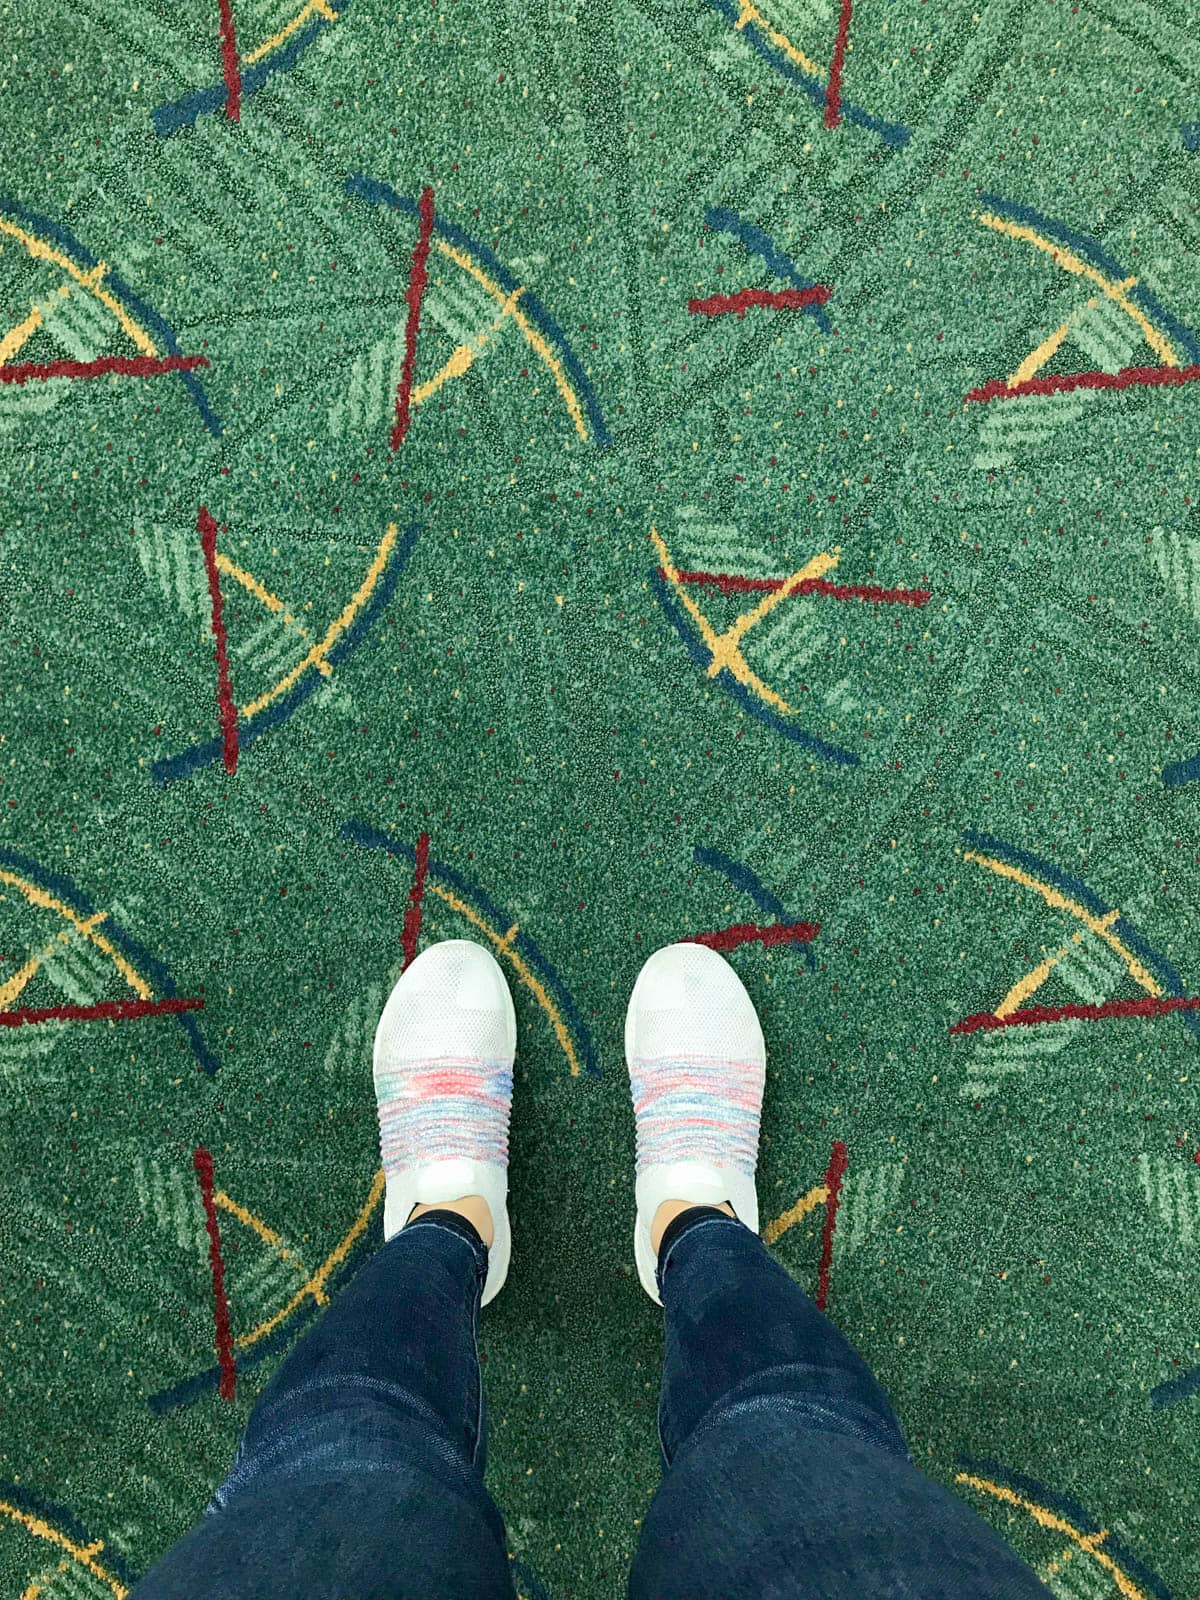 A top-down view of green patterned carpet; the white sneakers of the woman taking the photo can be seen.